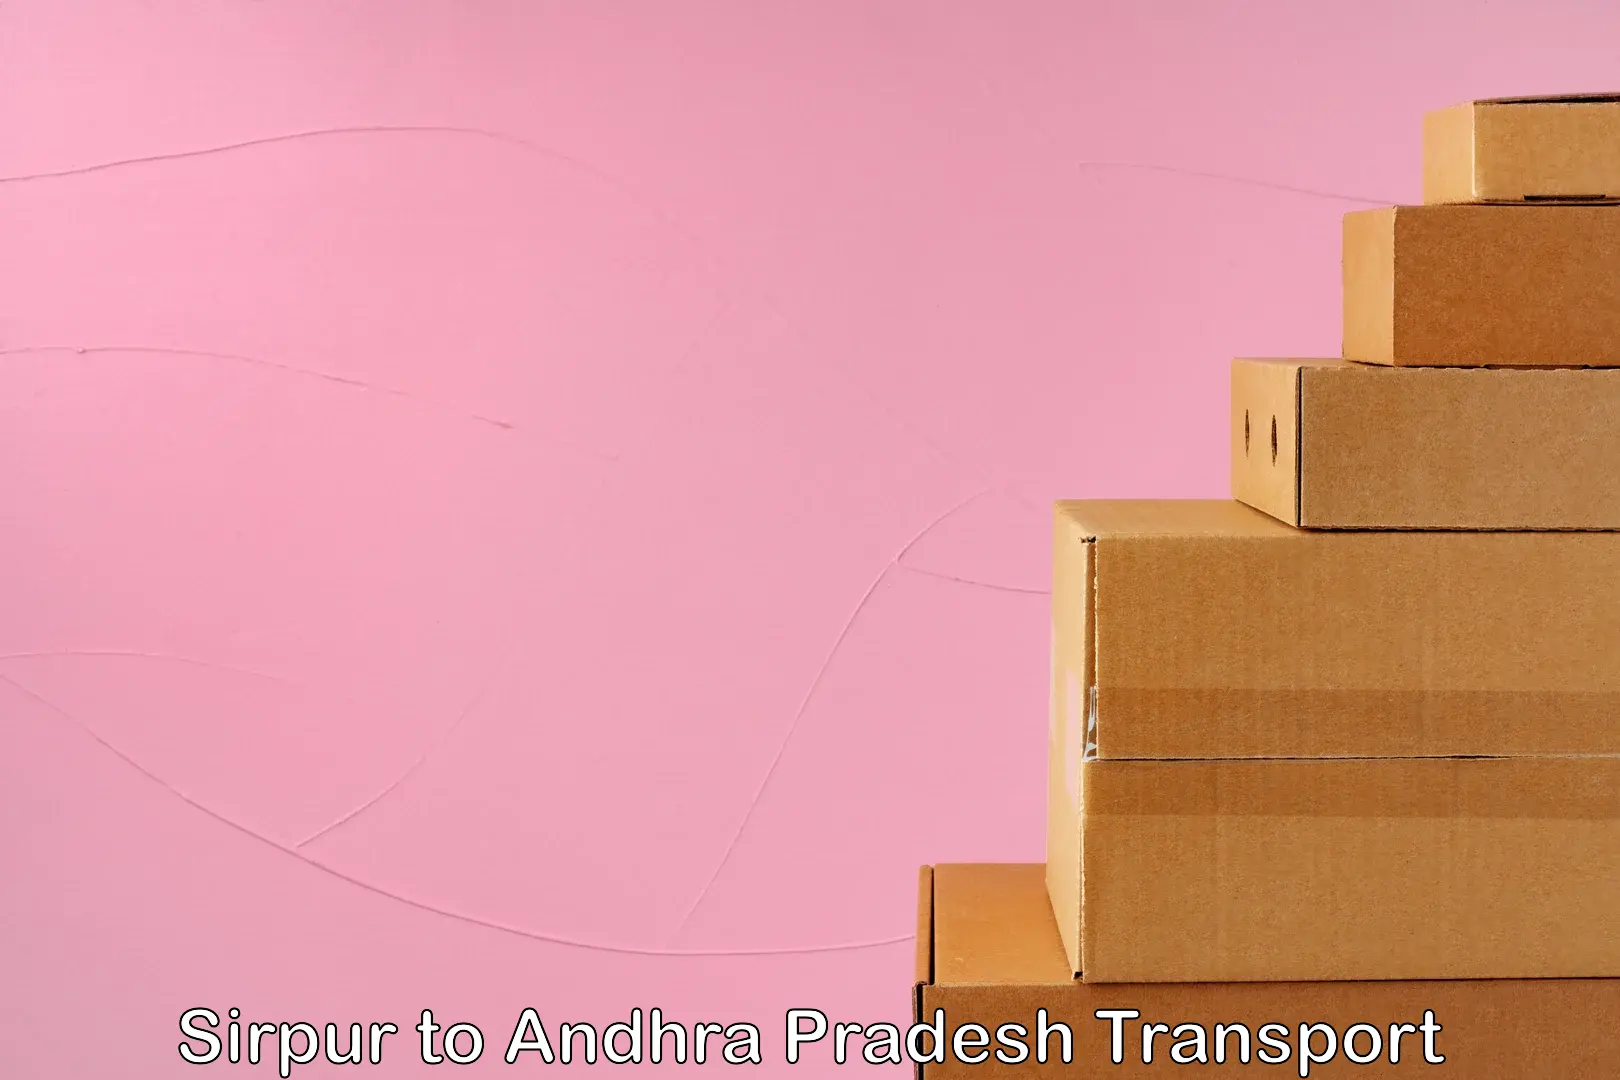 Transport bike from one state to another Sirpur to Andhra Pradesh